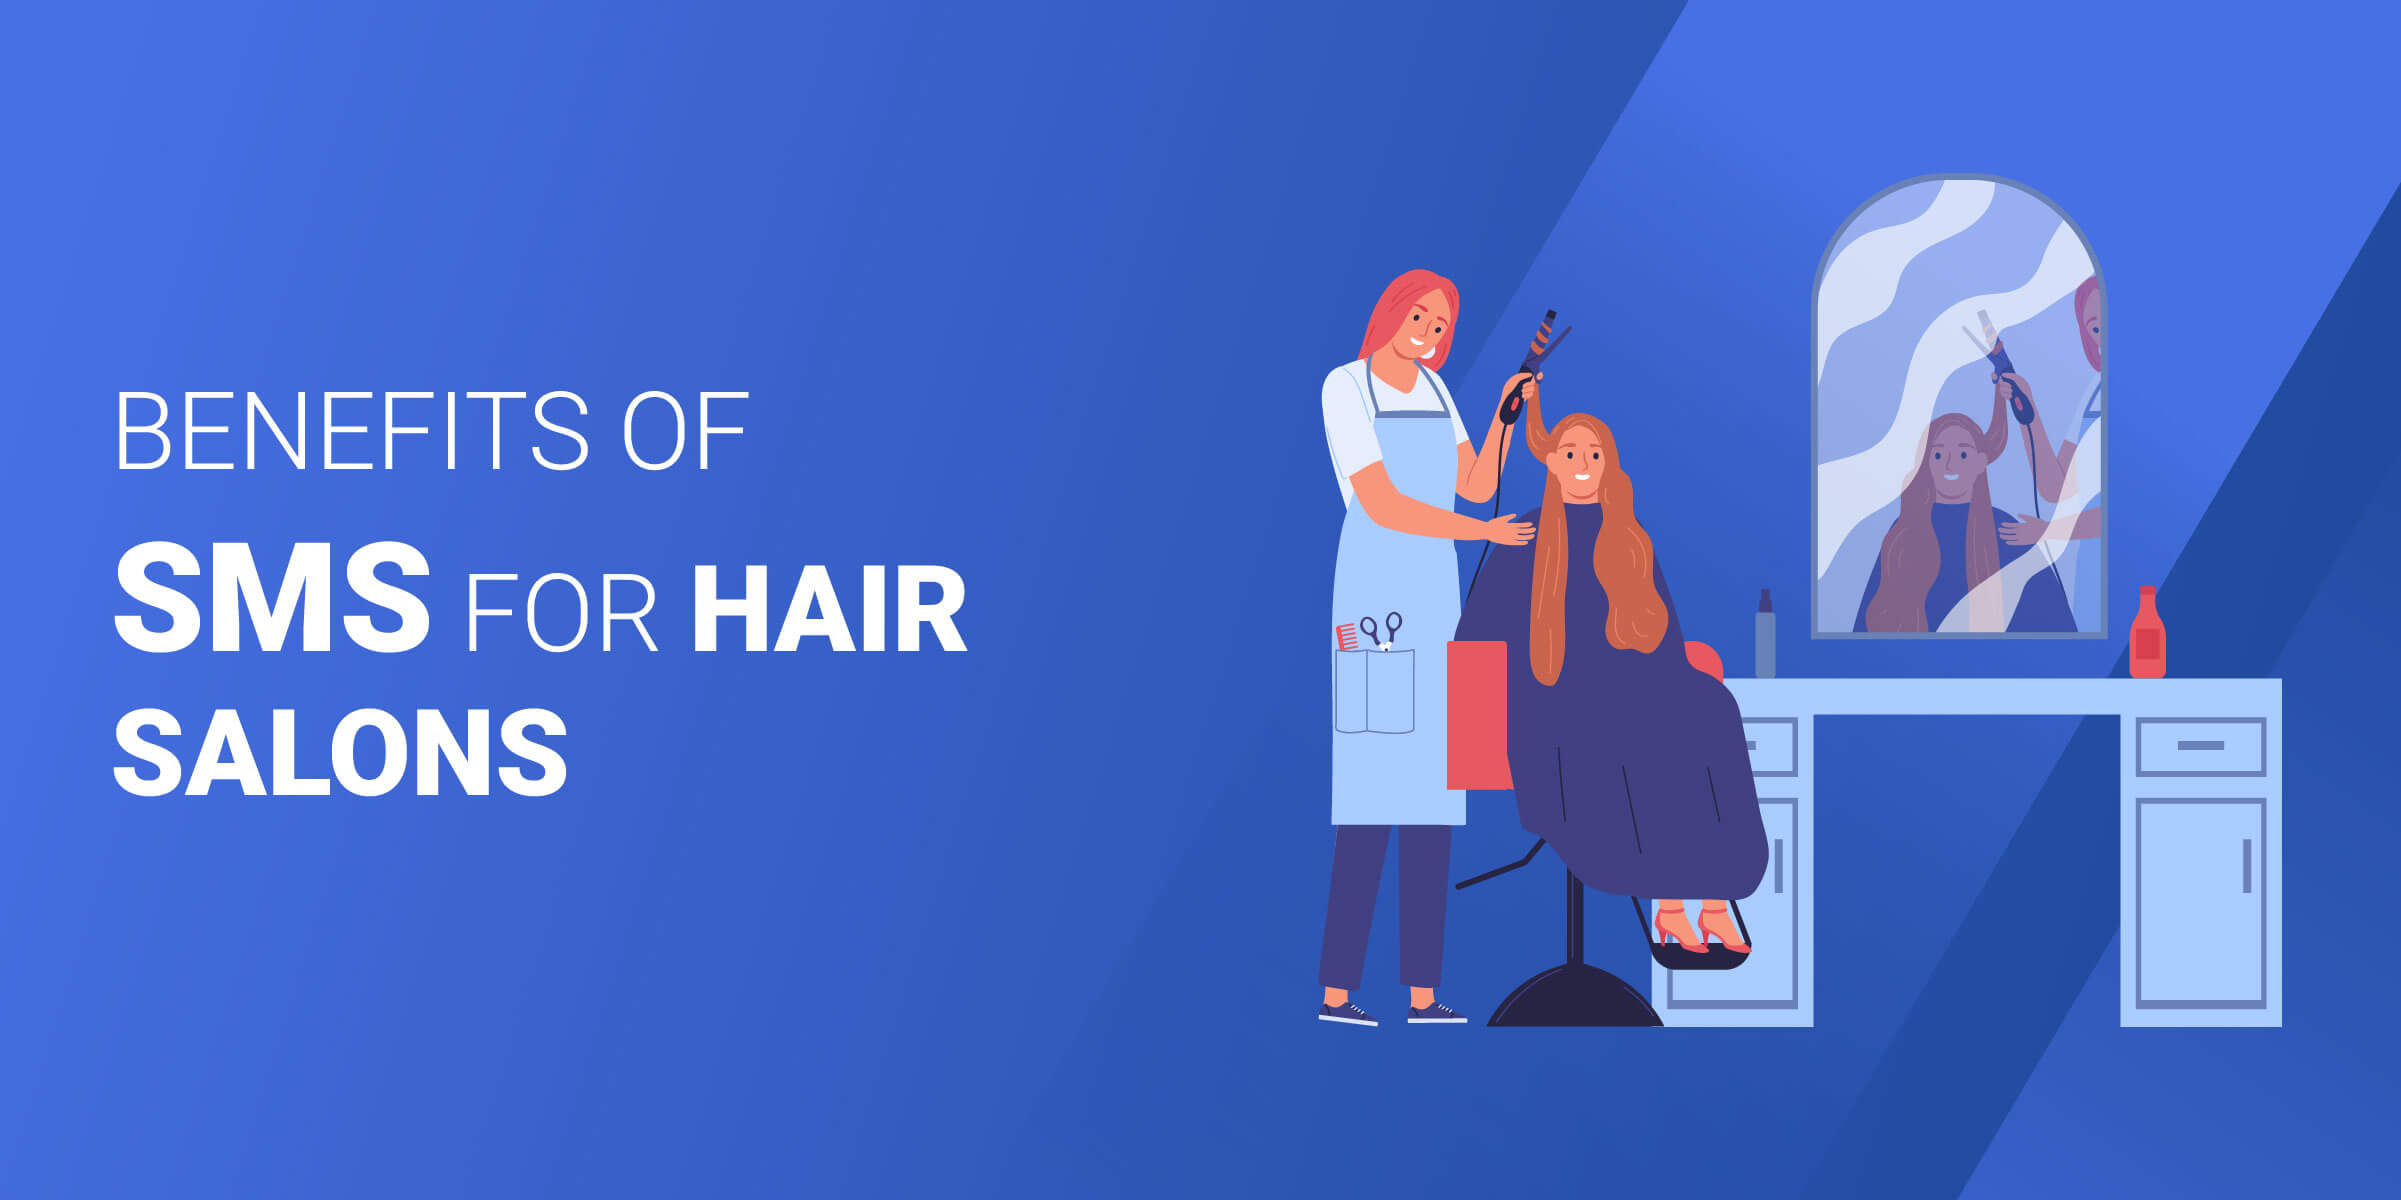 Benefits of SMS for Hair Salons